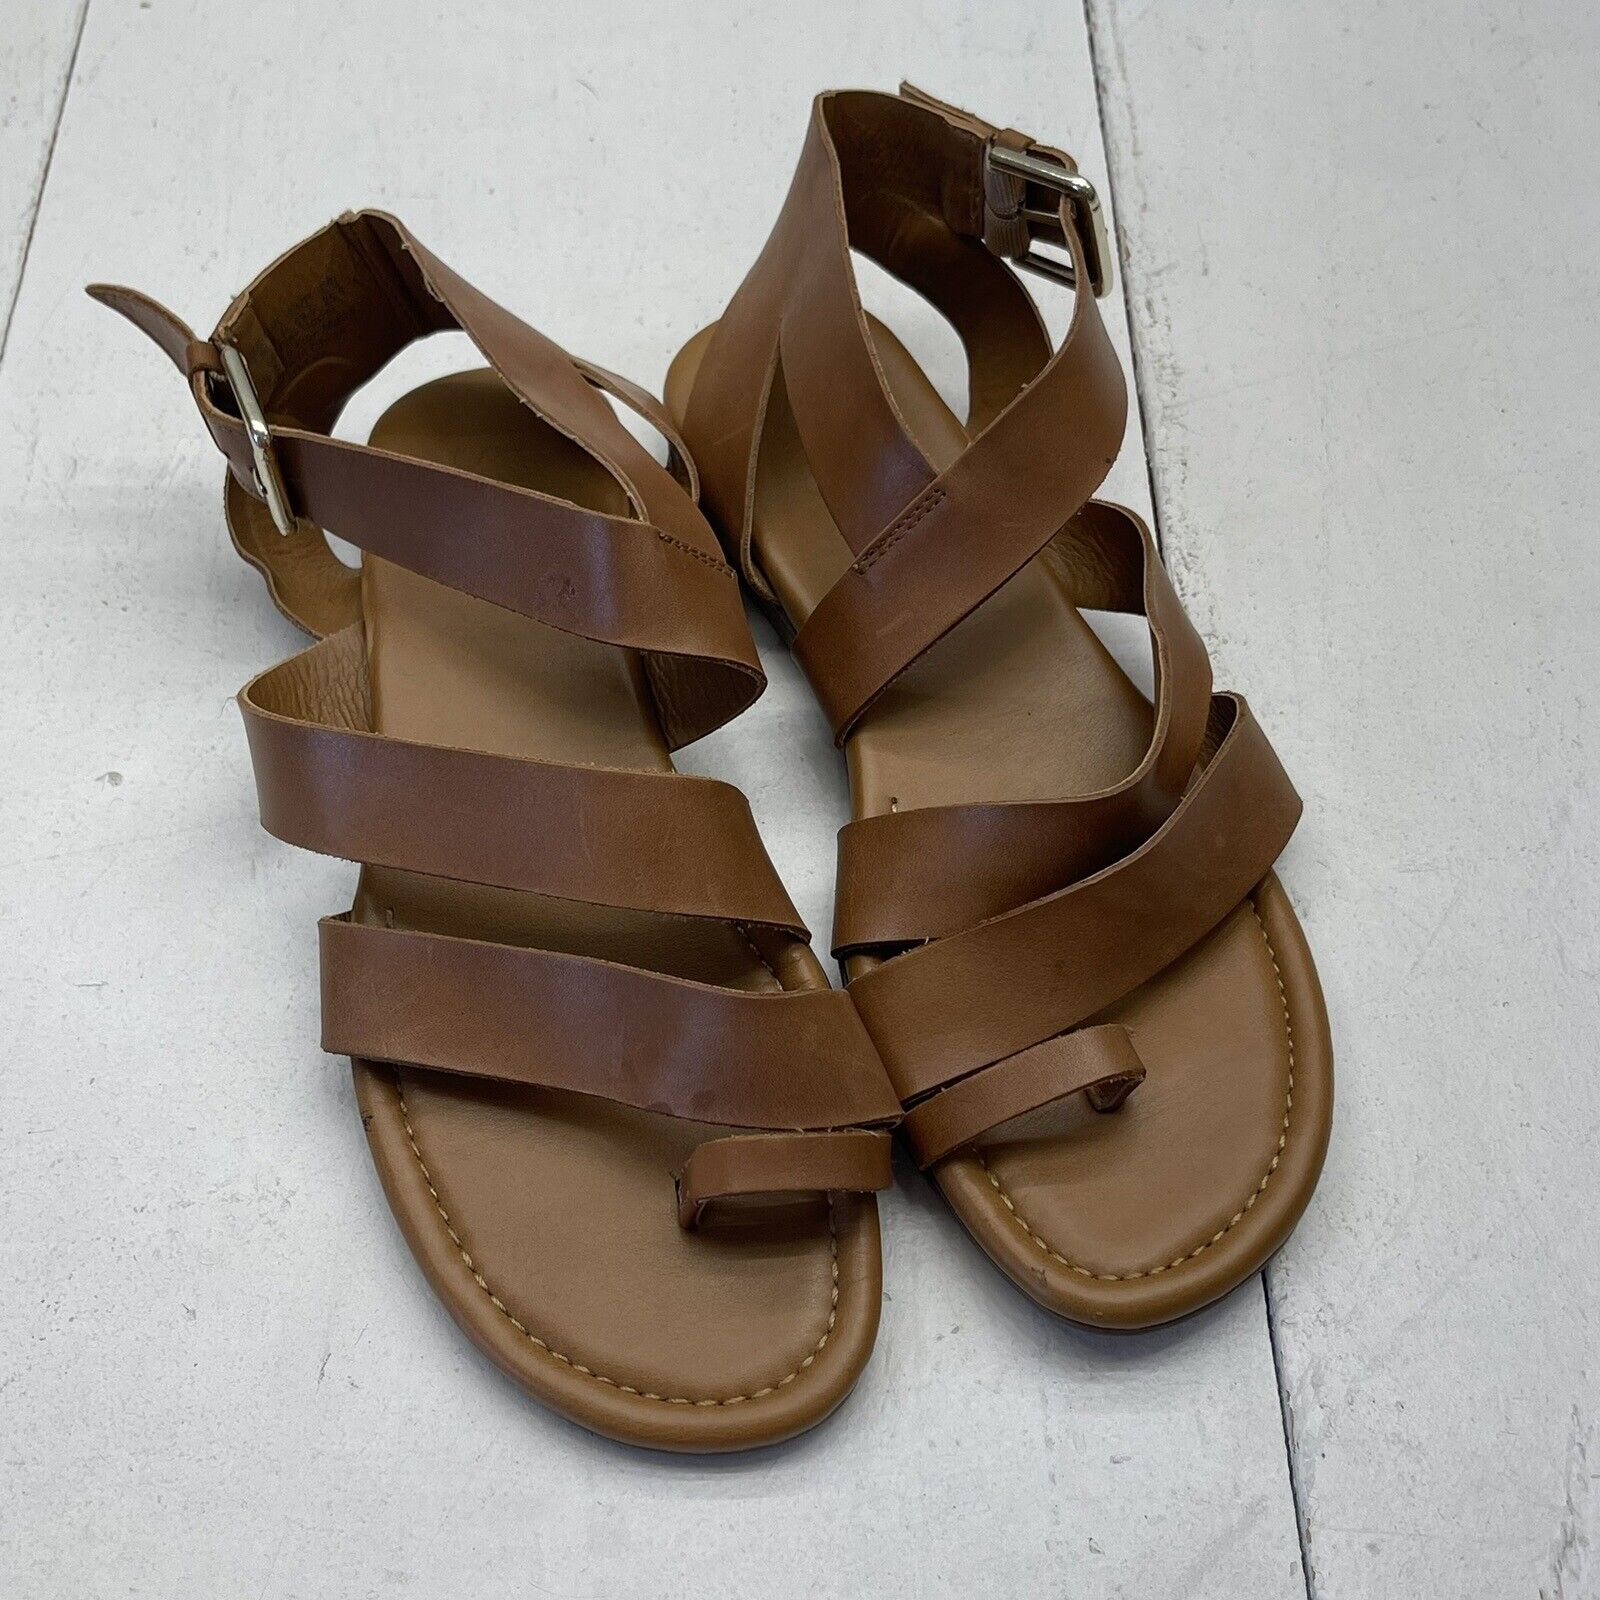 Franco Sarto Brown Leather Sandals L-Gavin Camelot LE Size 8 M New With Box  - Helia Beer Co